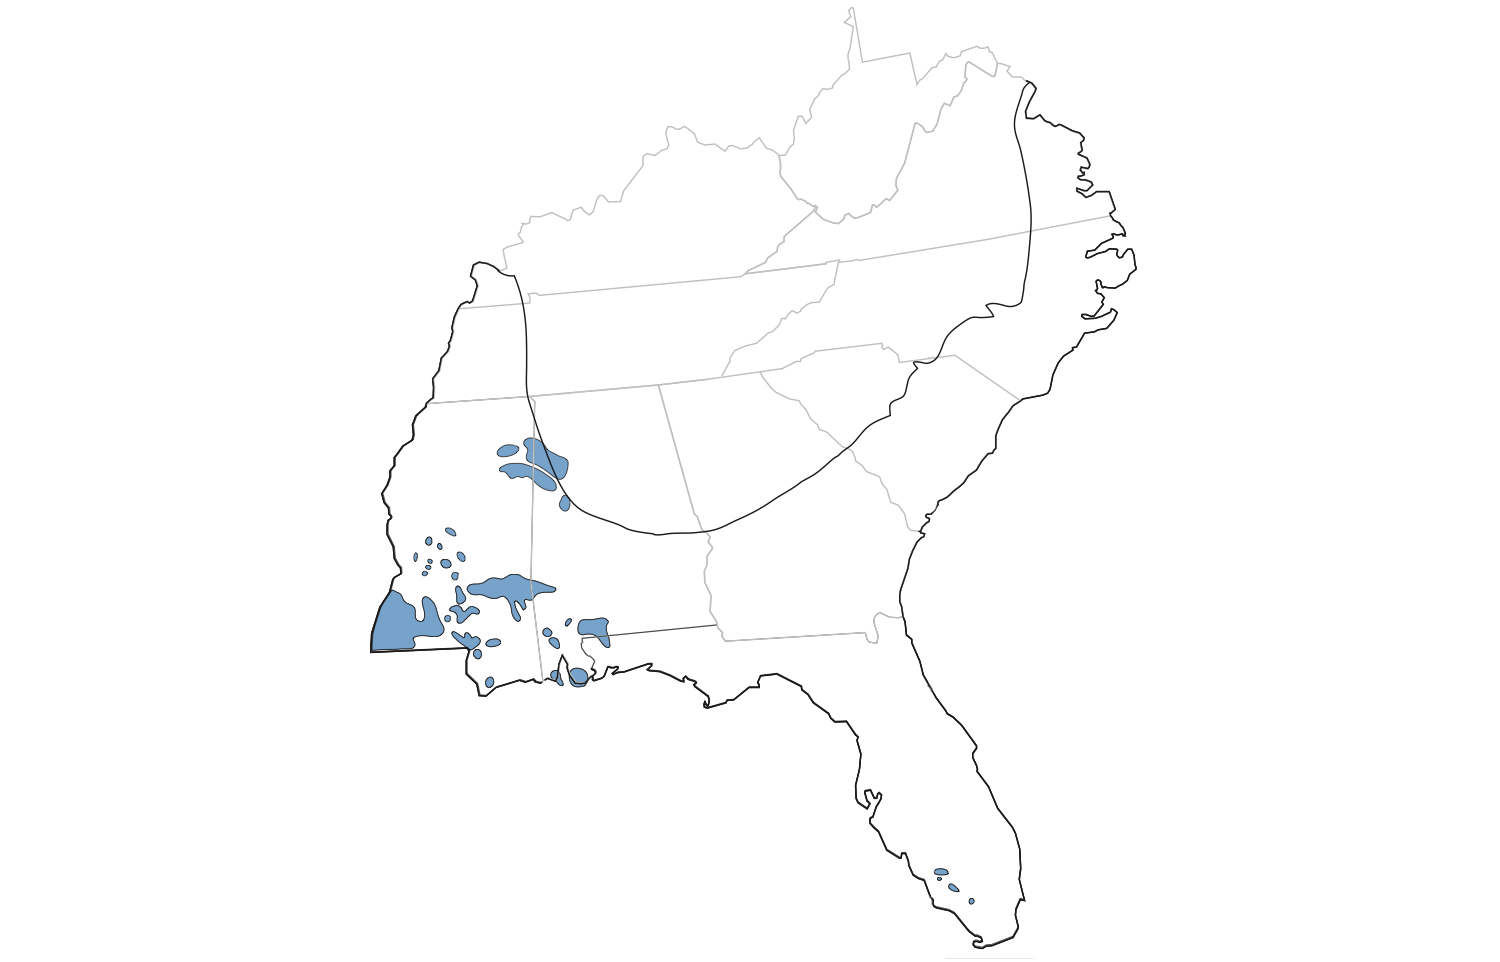 Map of known oil and gas fields in the Coastal Plain region of the Southeastern US. Most are in Mississippi and Alabama.